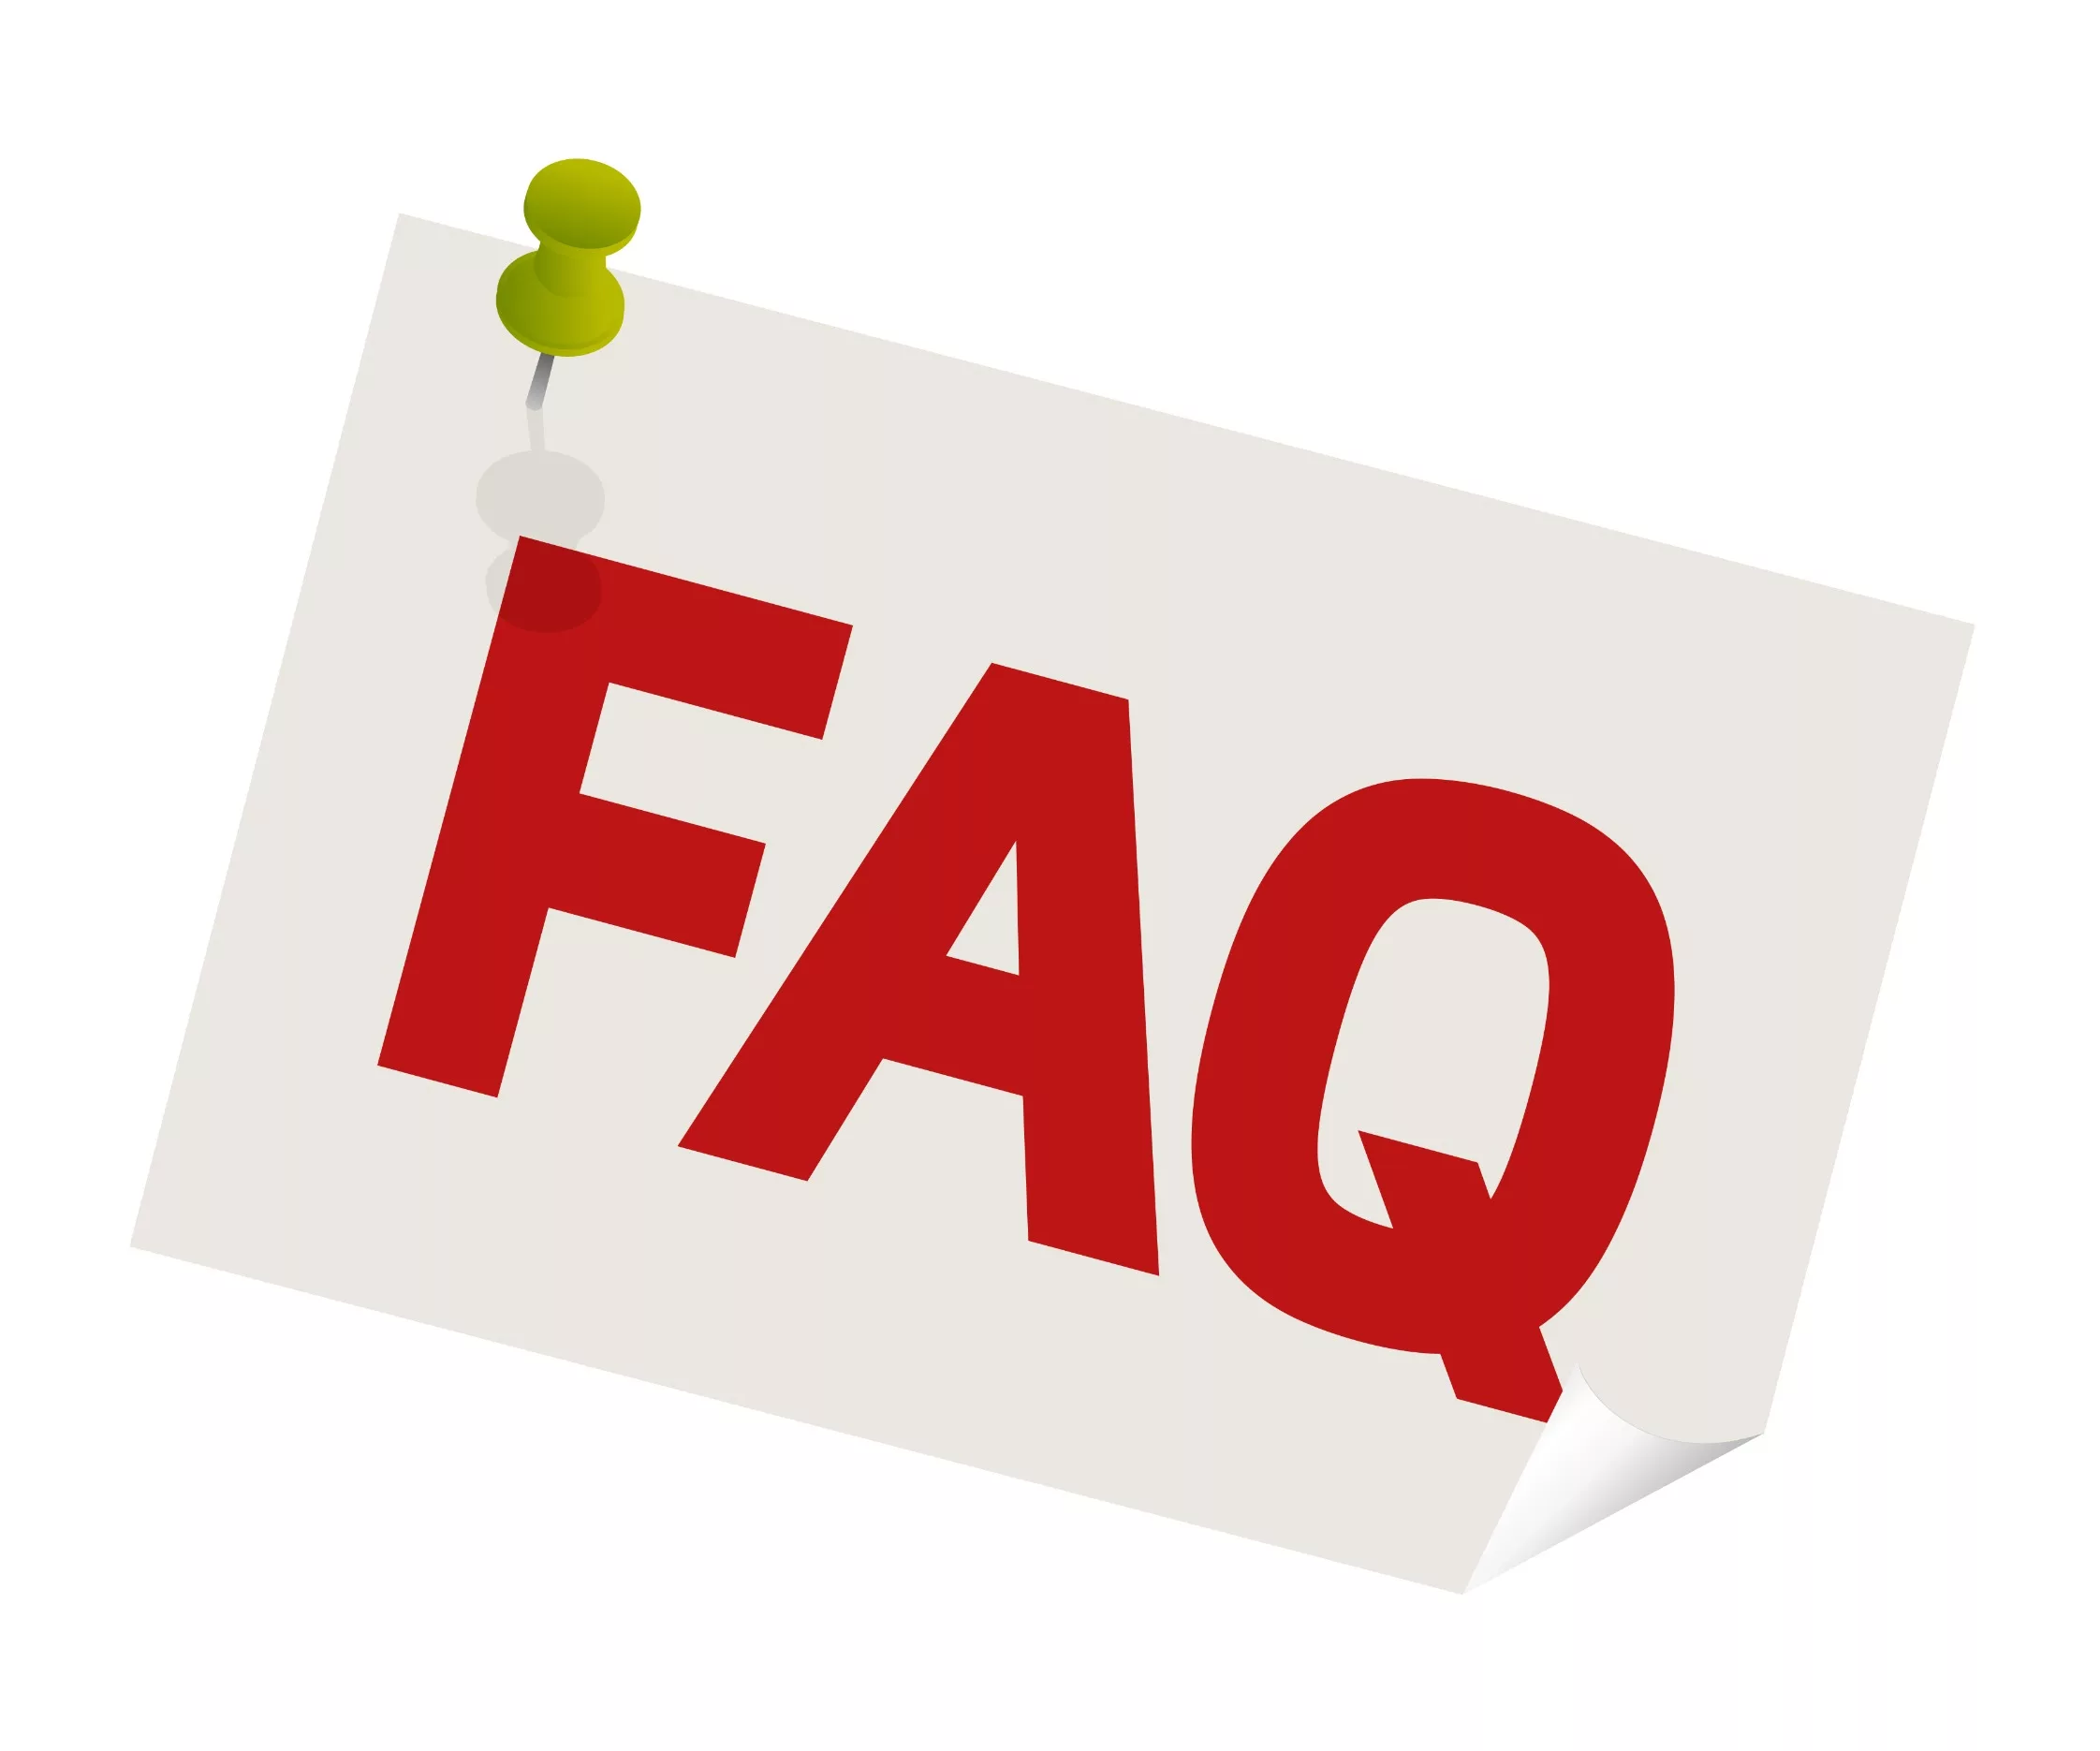 Frequently Asked Questions When Looking for a New Dentist